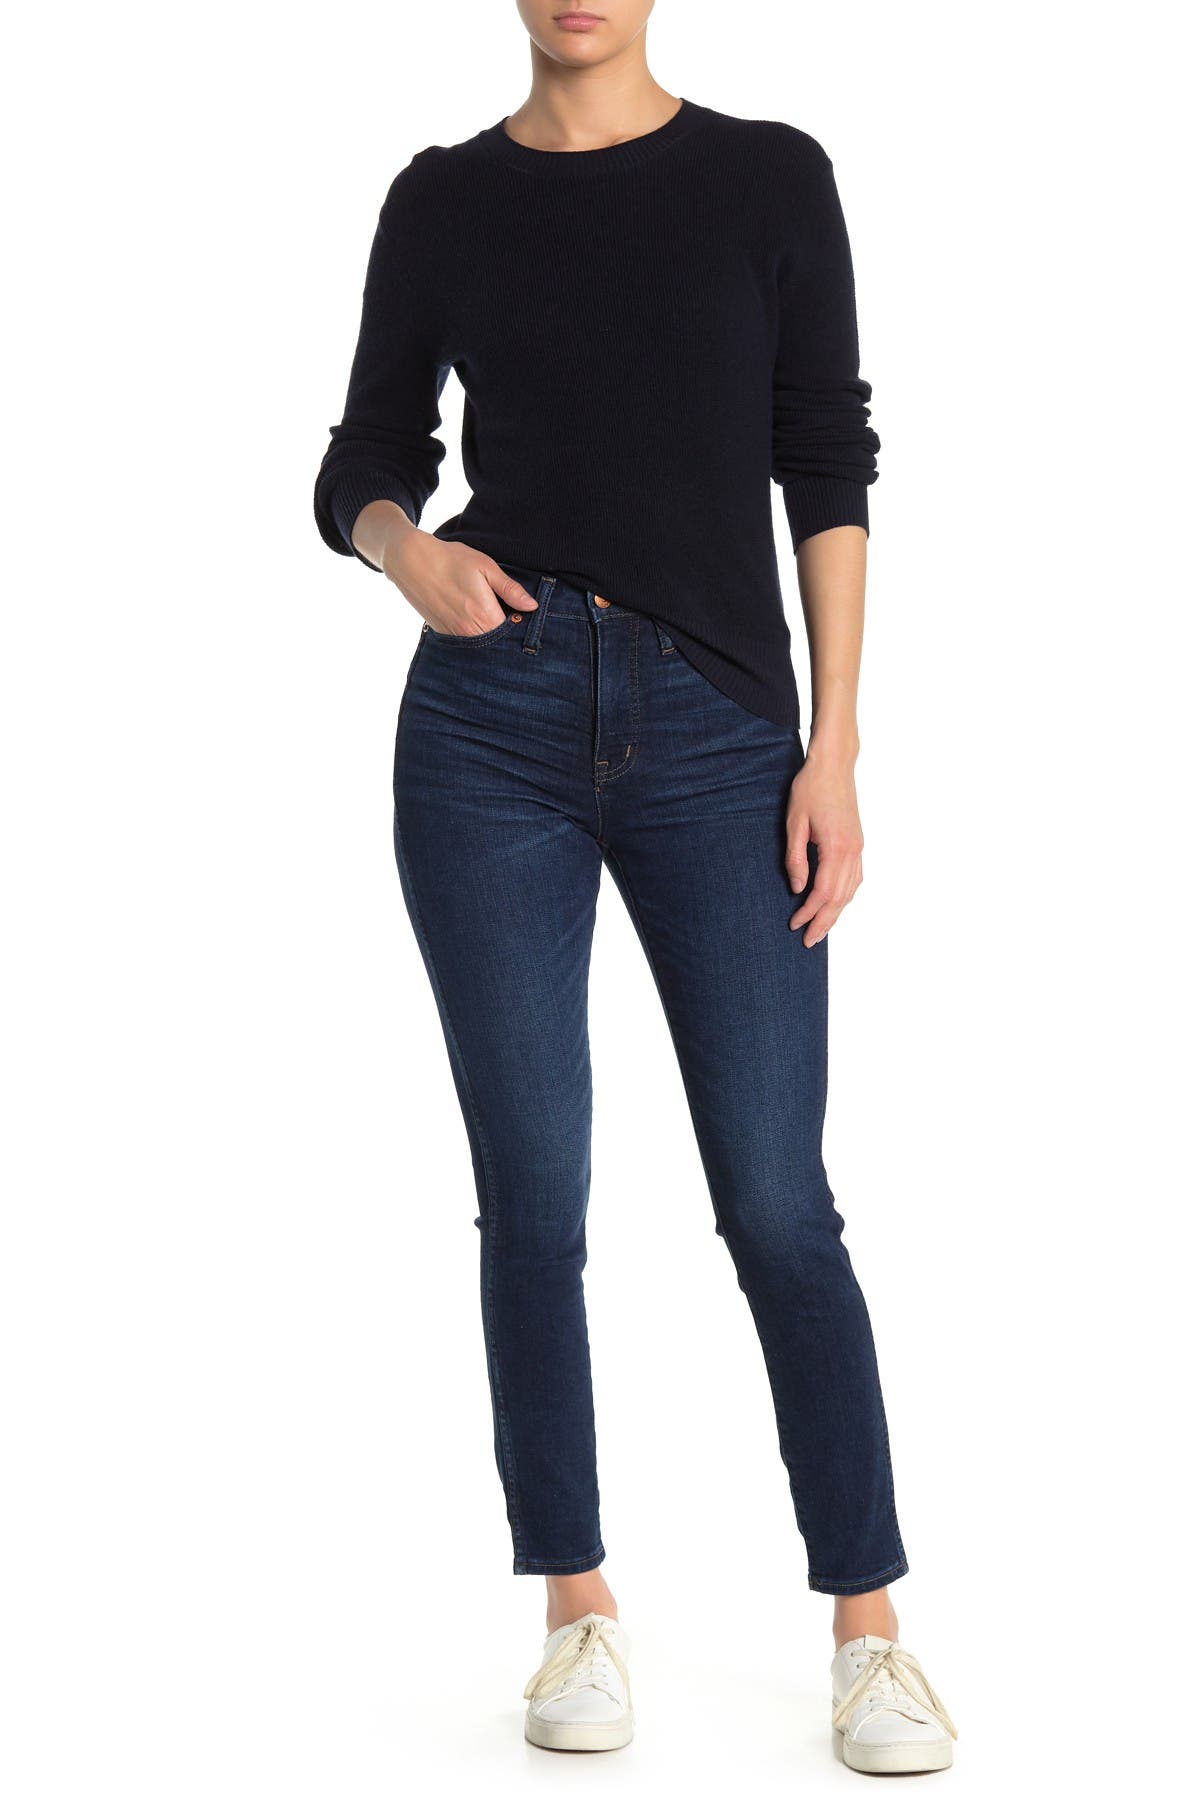 madewell jeans